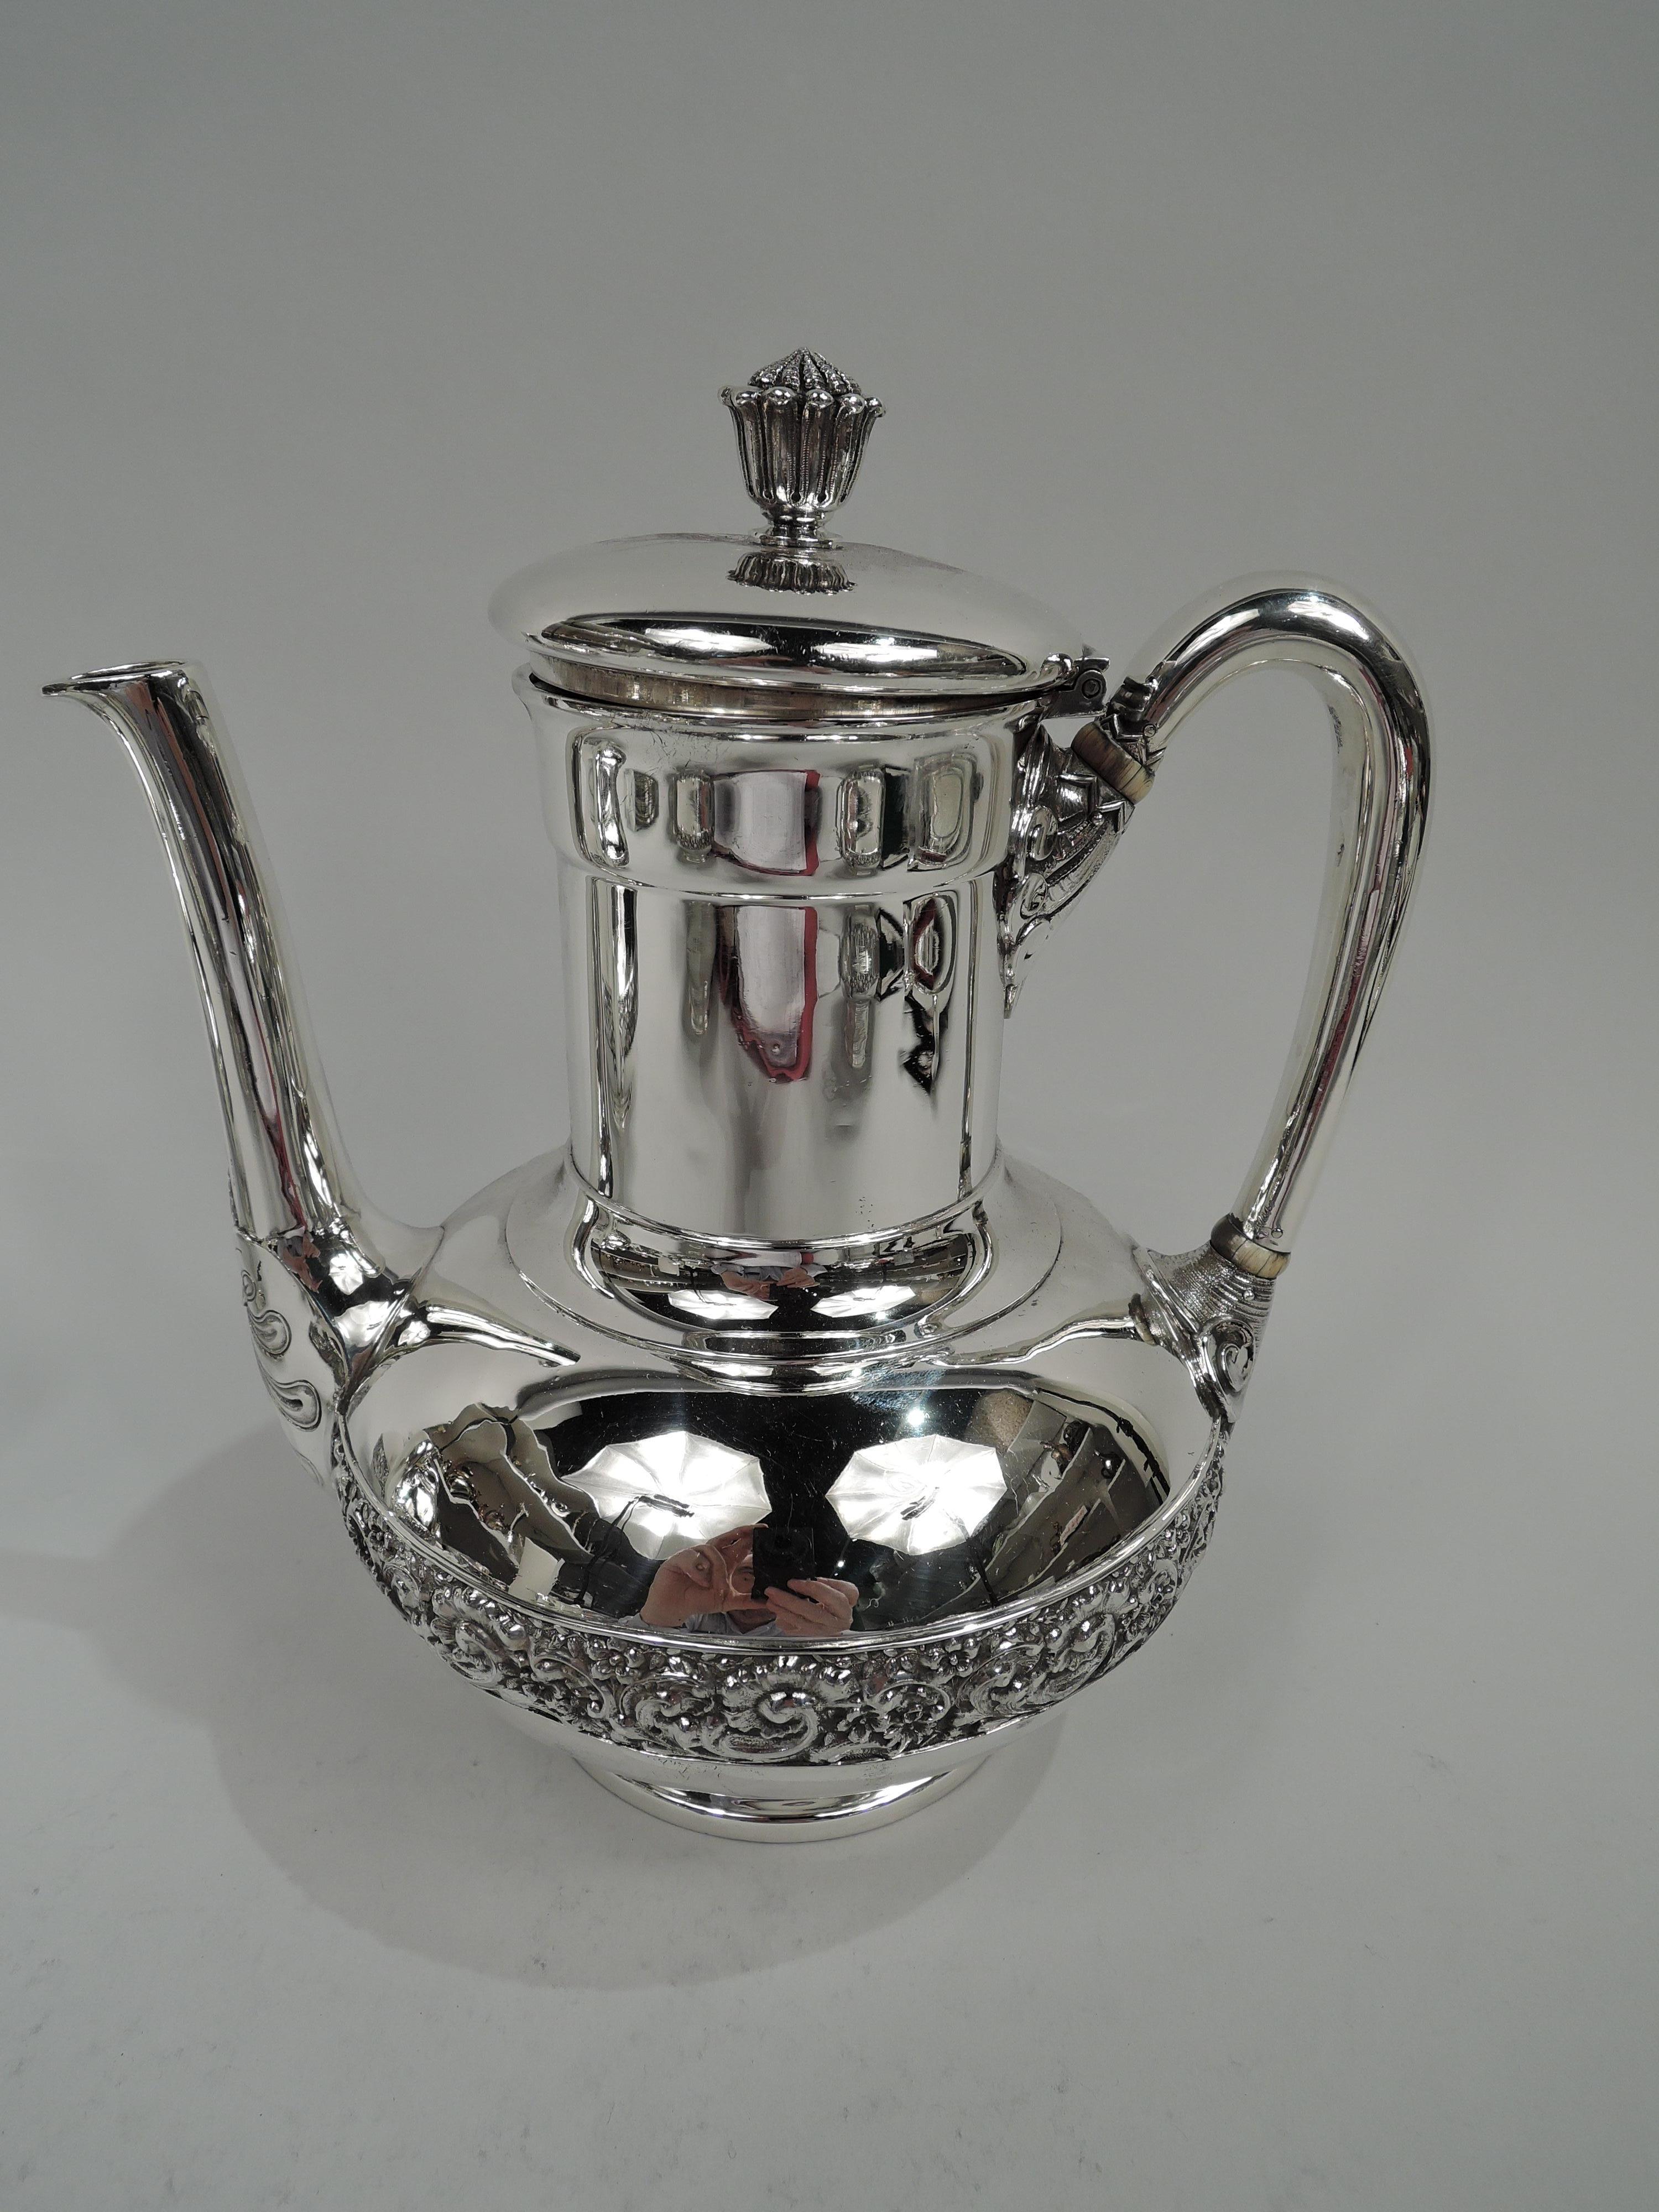 Victorian Classical sterling silver coffee and tea set. Made by Tiffany & Co. in New York. This set comprises coffeepot, teapot, creamer, sugar, and waste bowl.

Each: Bellied bowl on concave foot ring. Covers raised with cast bud finial (pot covers